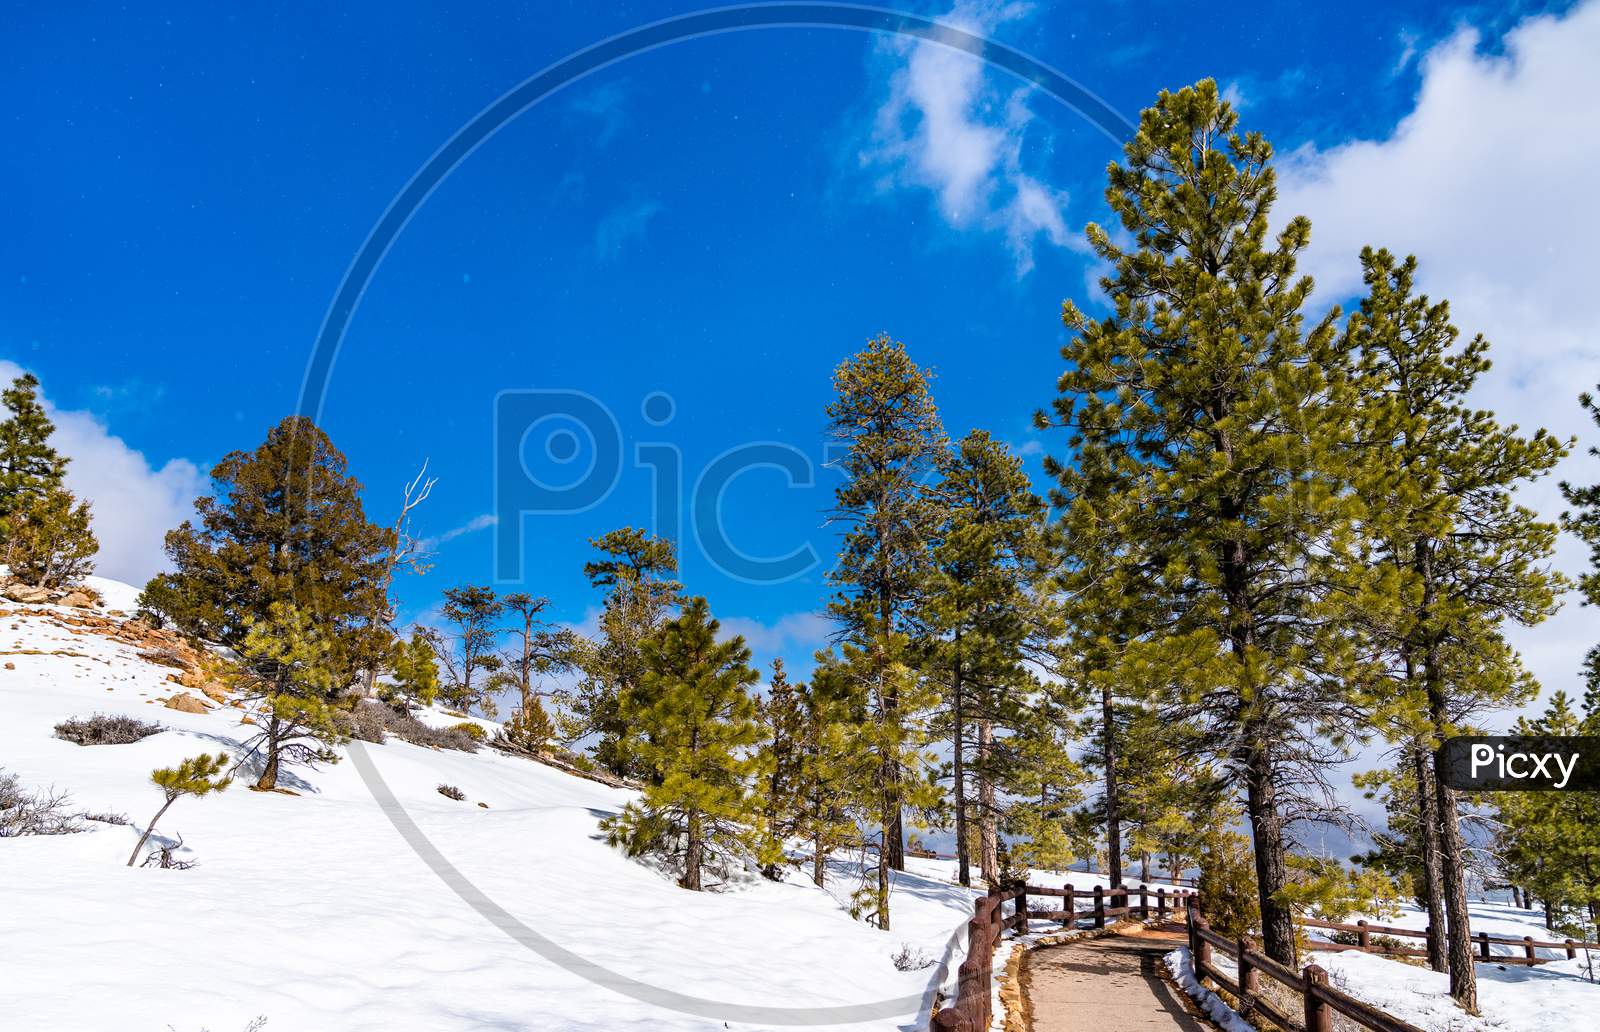 Winter Woodland Scenery At Bryce Canyon, The Usa